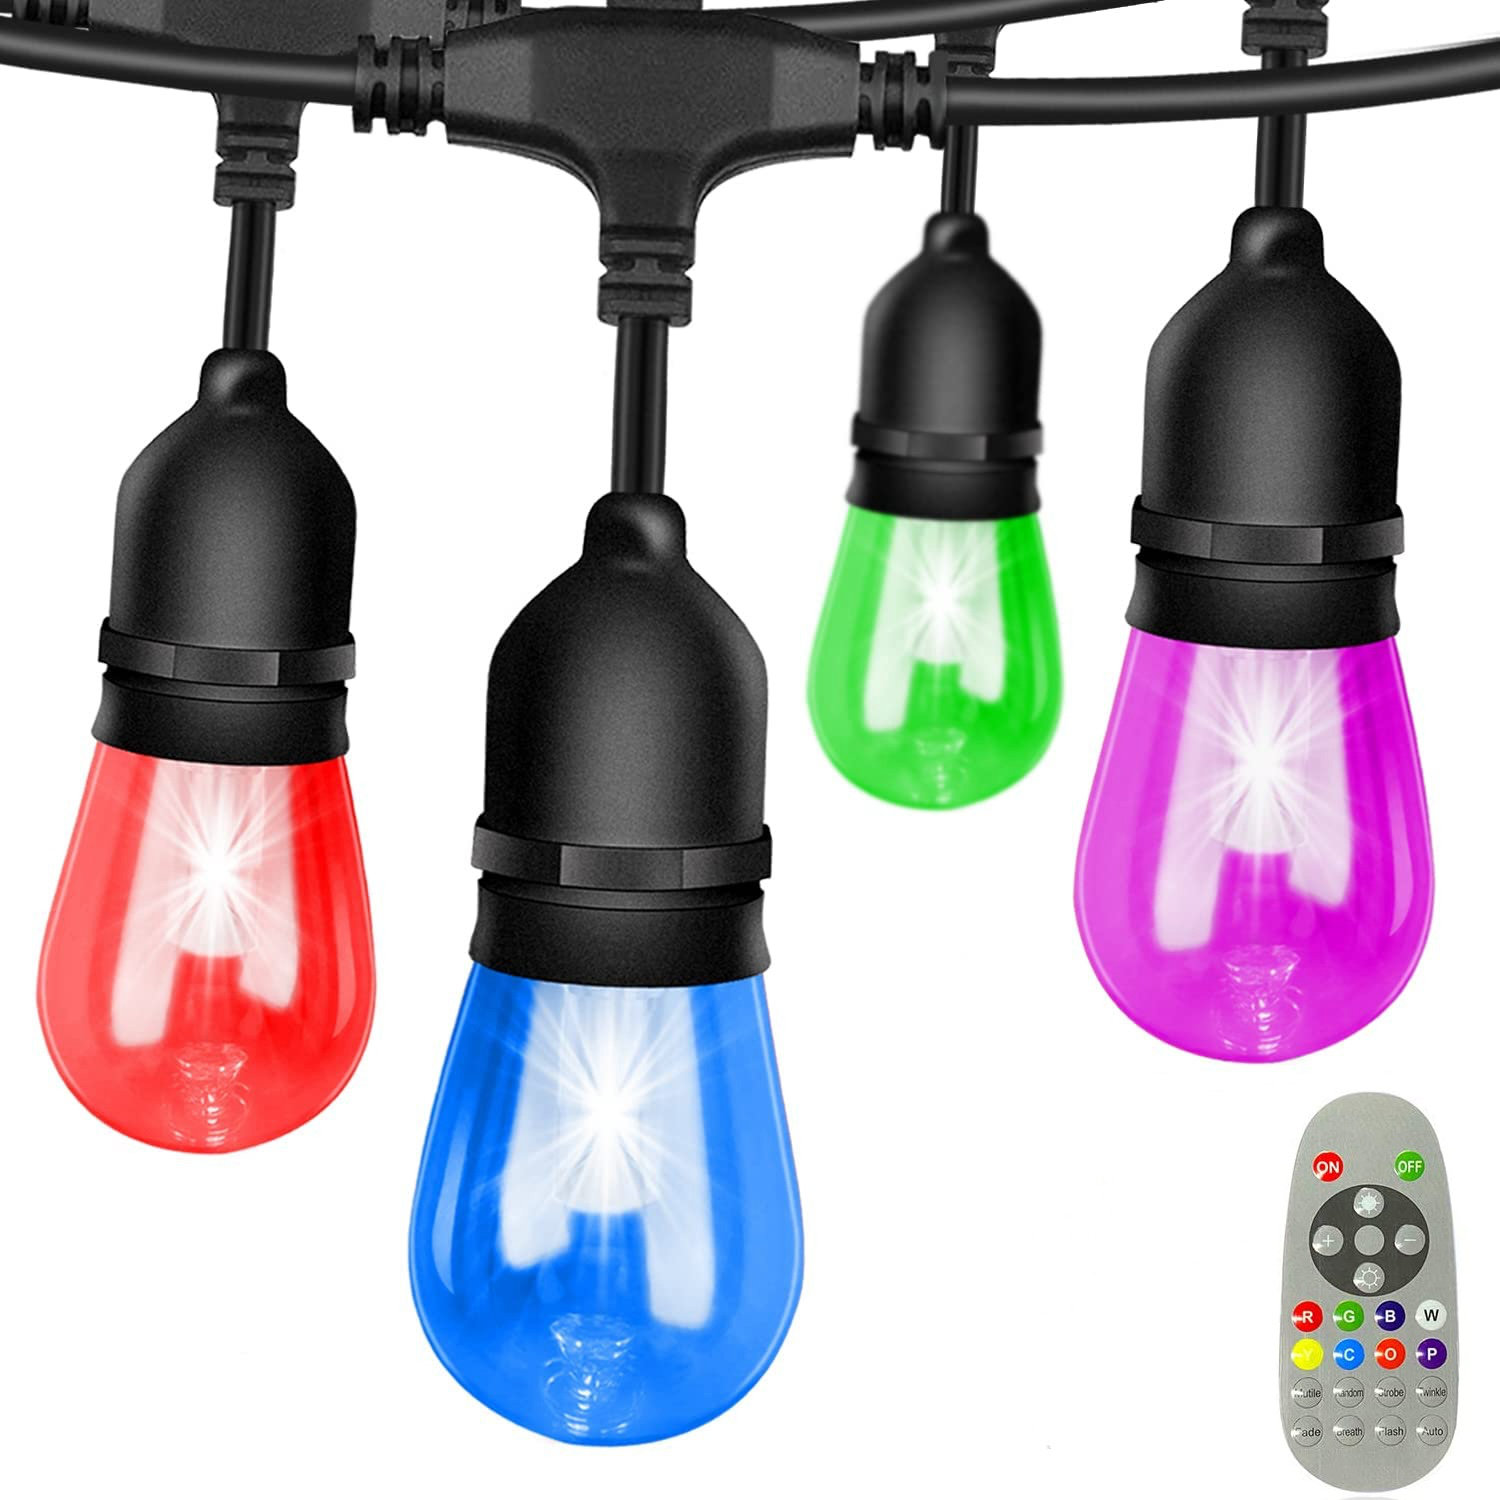 Arlmont  Co. 48ft Outdoor String Light with Color Changing Bulbs Dimmable  for Patio Backyard Garden  Reviews Wayfair